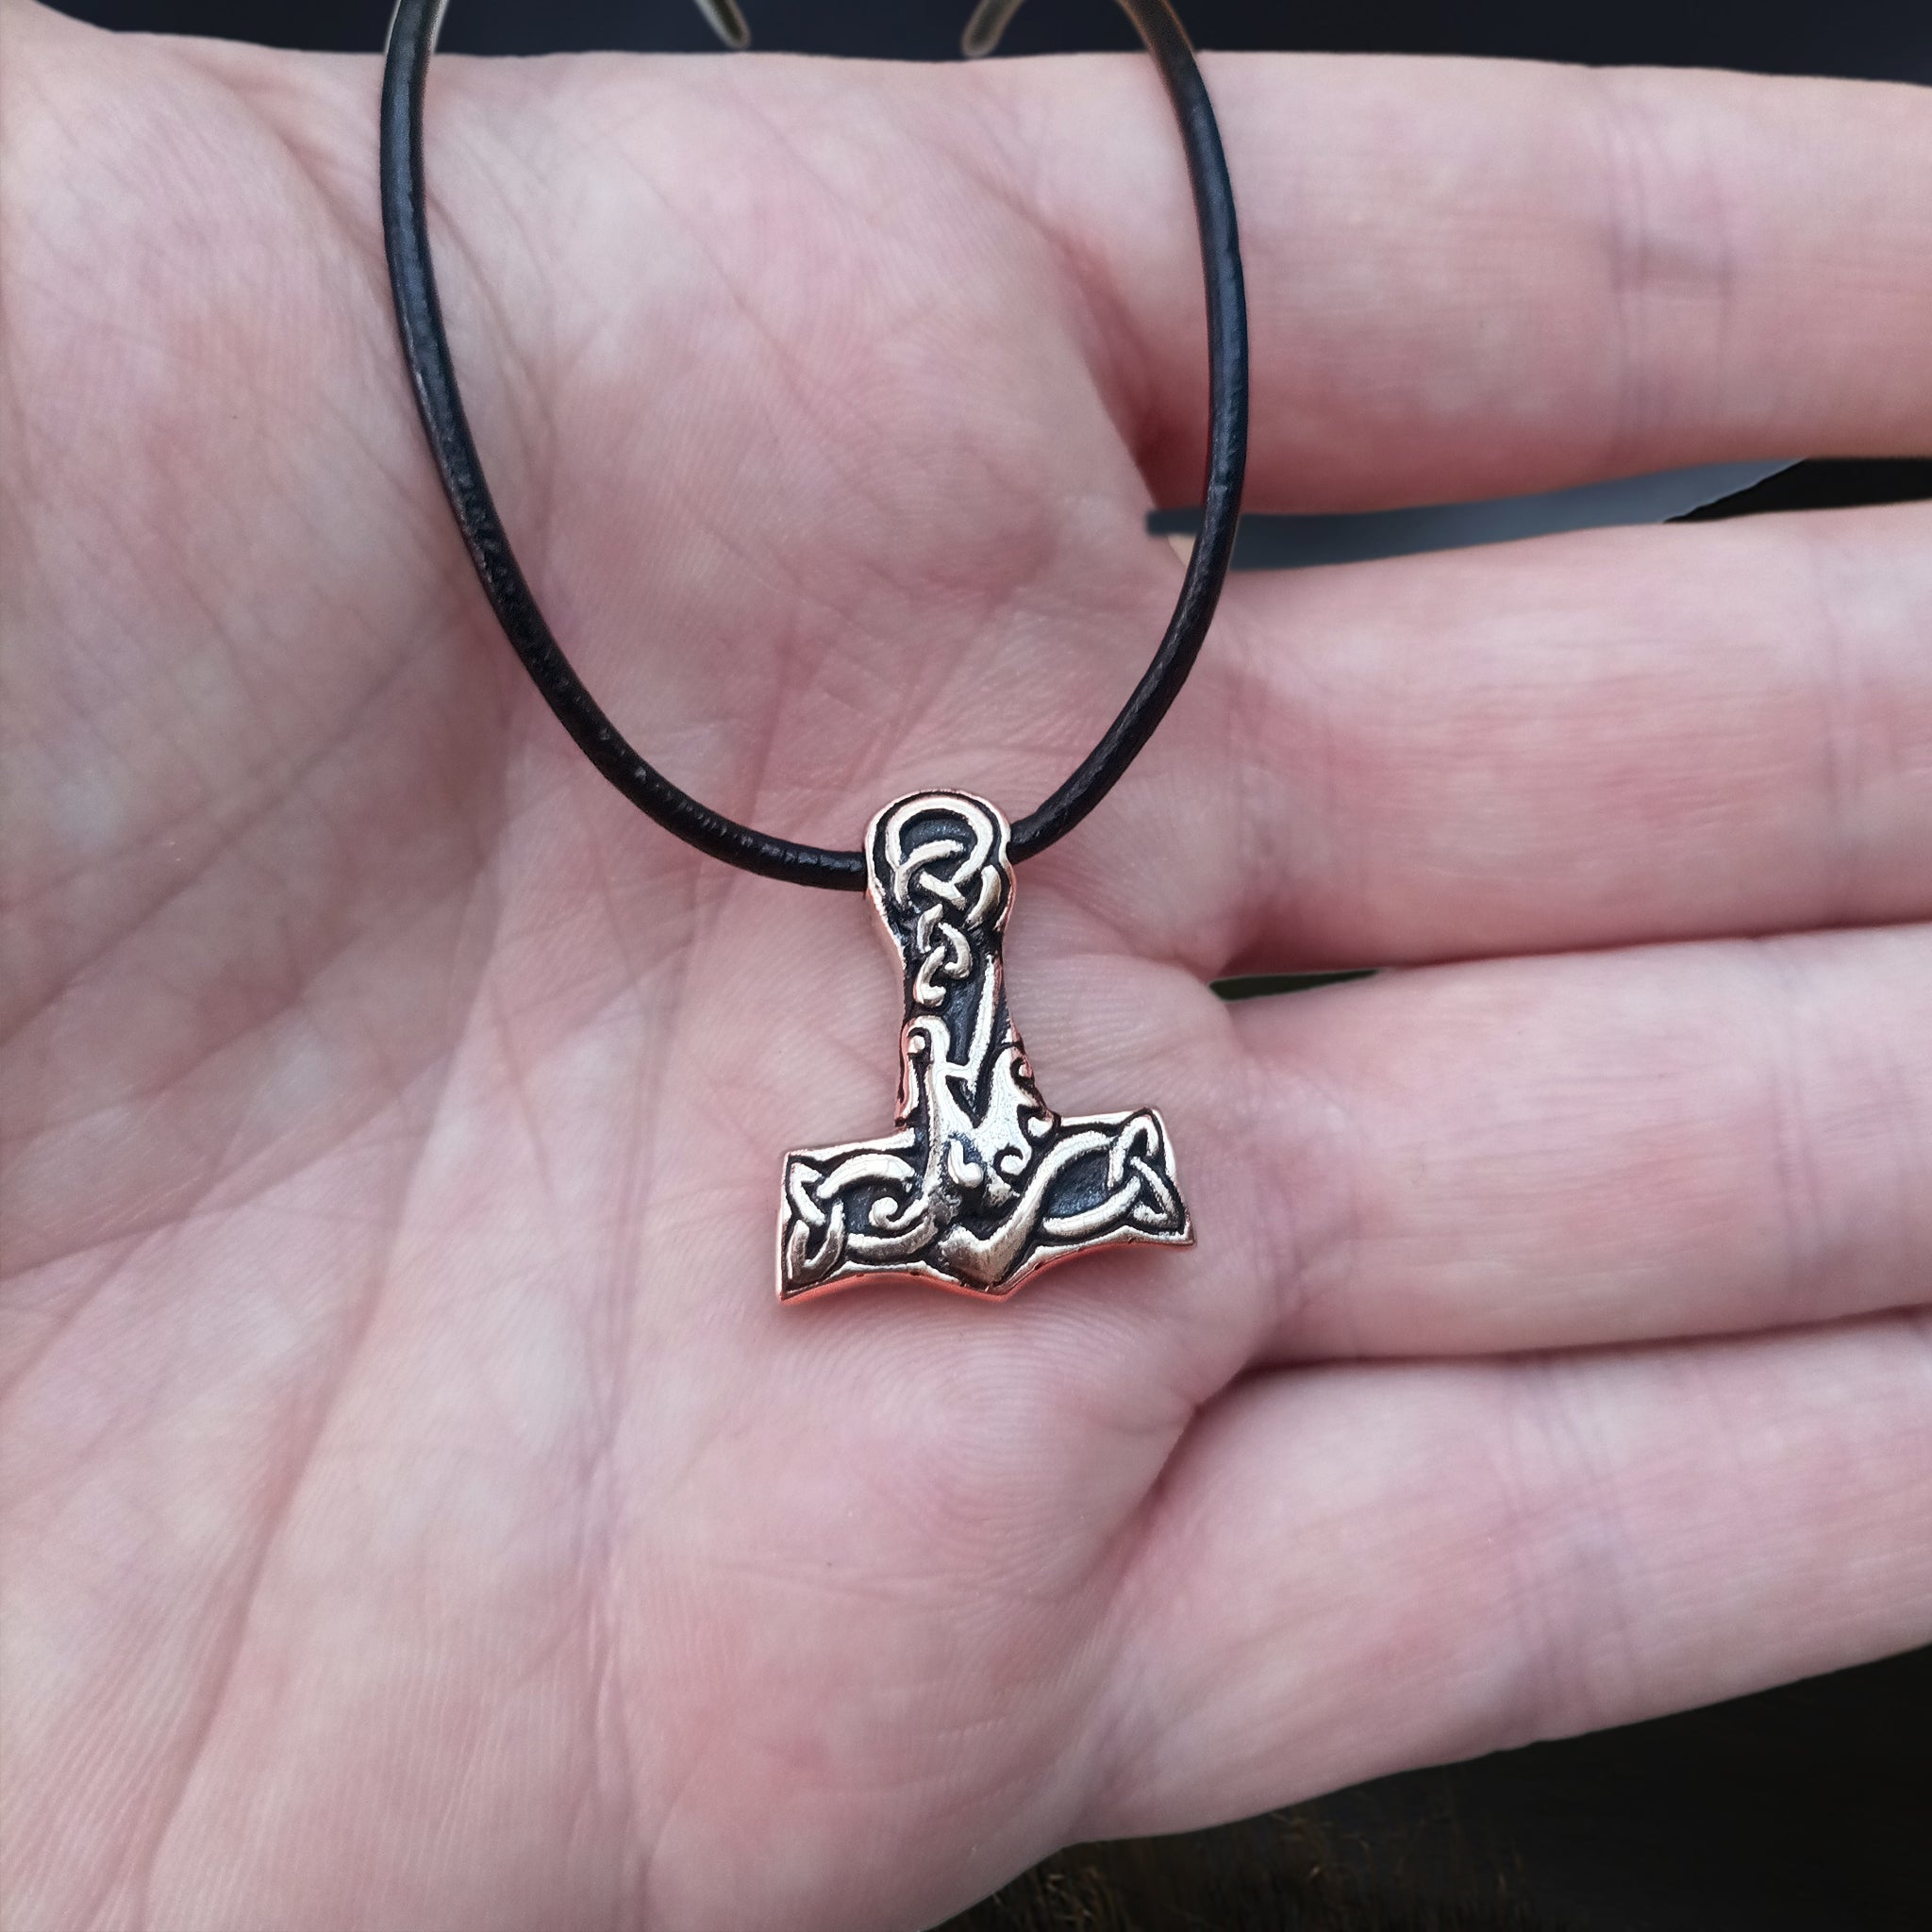 Small Bronze Interlace Thors Hammer Viking Pendant on Leather Thong on Hand